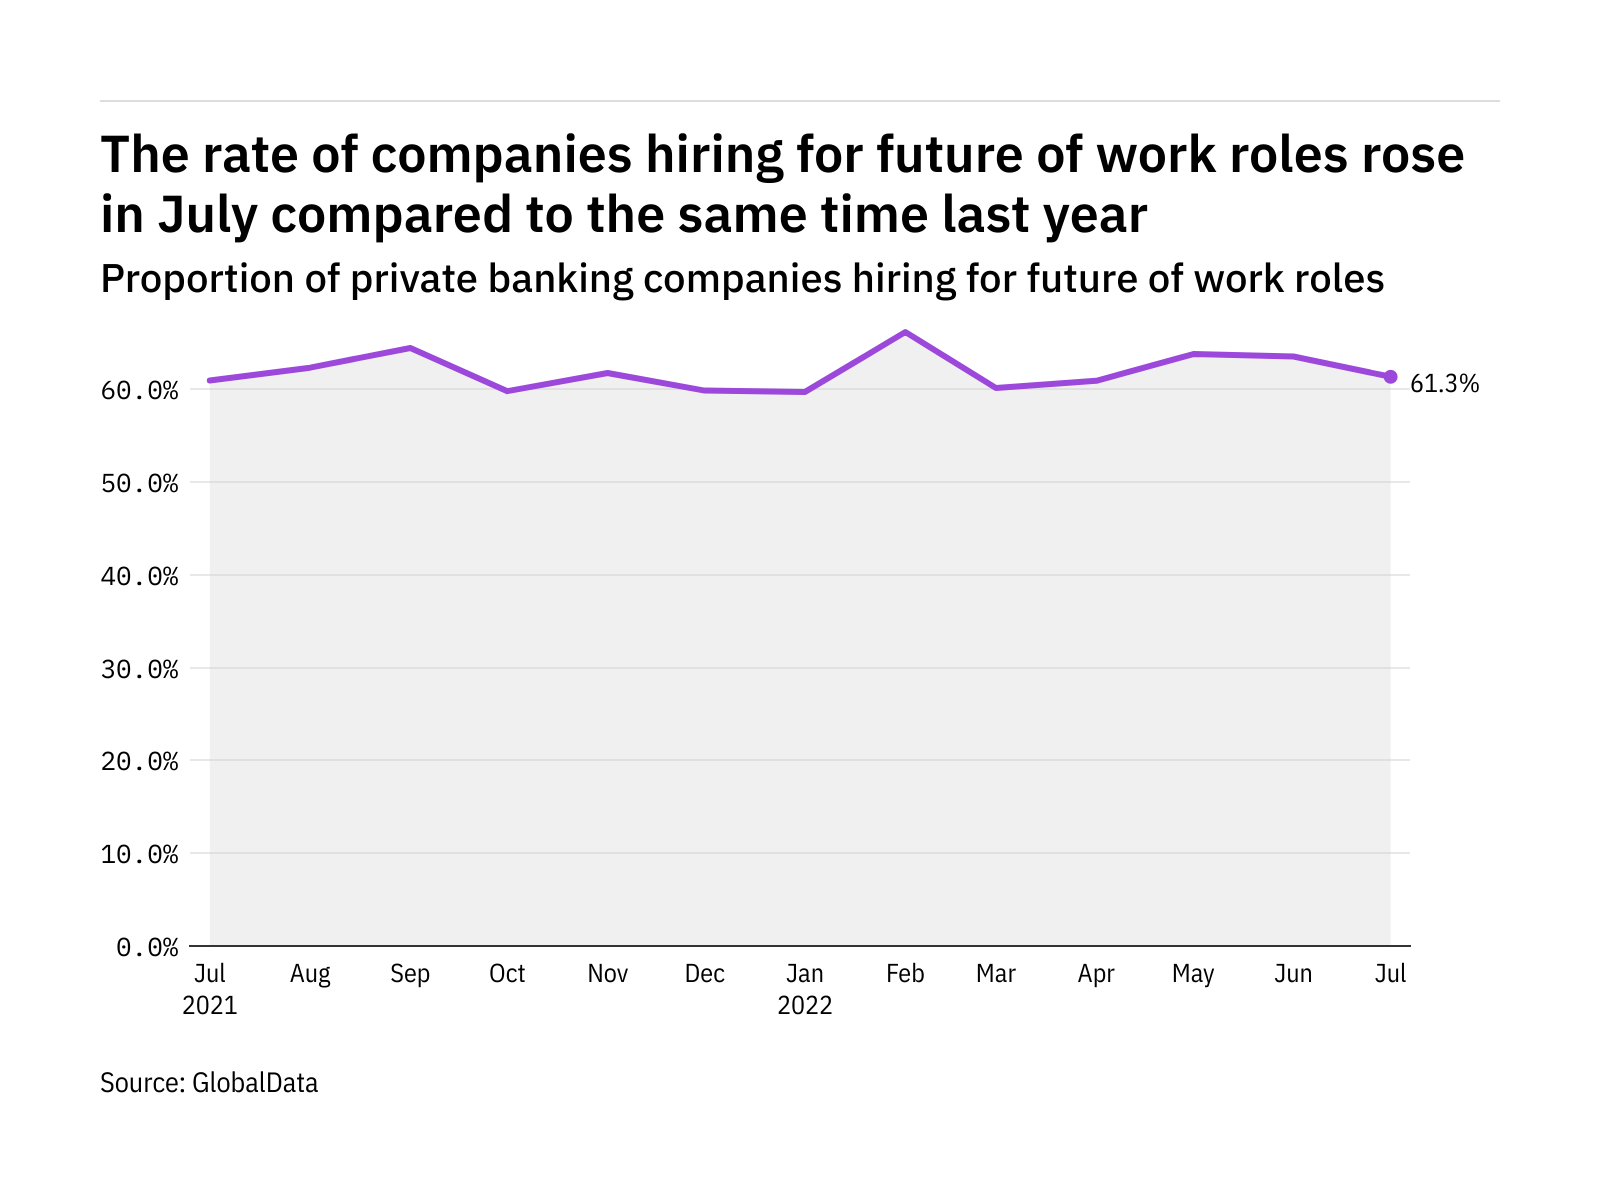 Future of work hiring levels in the private banking industry rose in July 2022